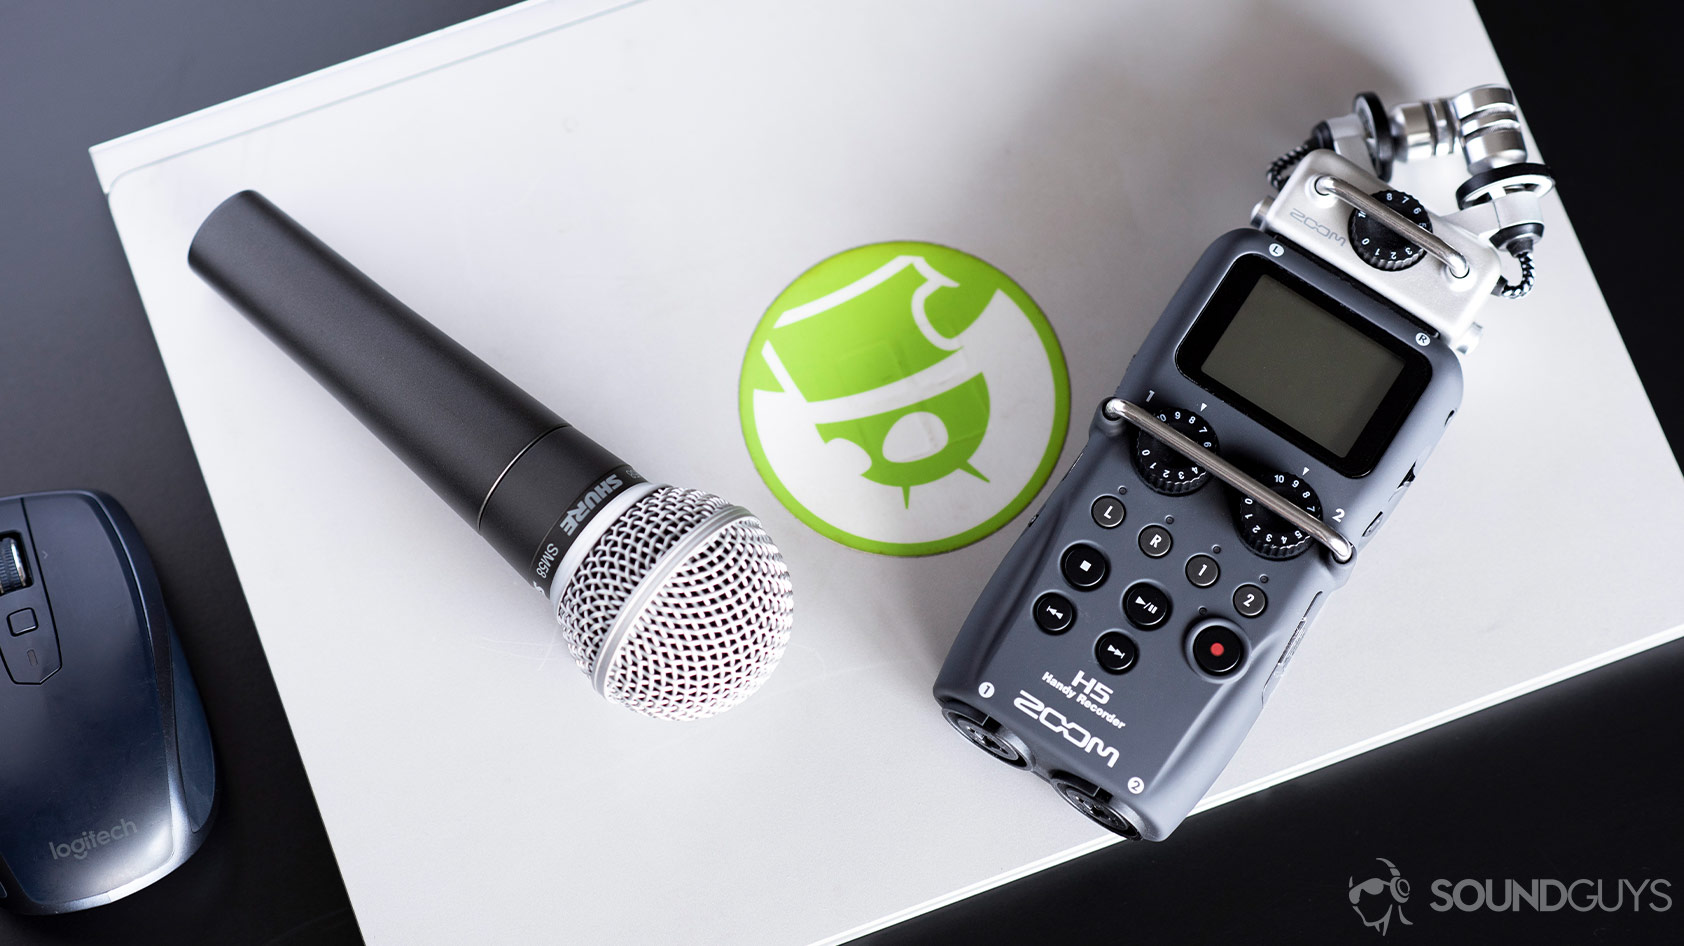 Lightning Souvenir yours Best voice recorders: For podcasts, field work, and more - SoundGuys